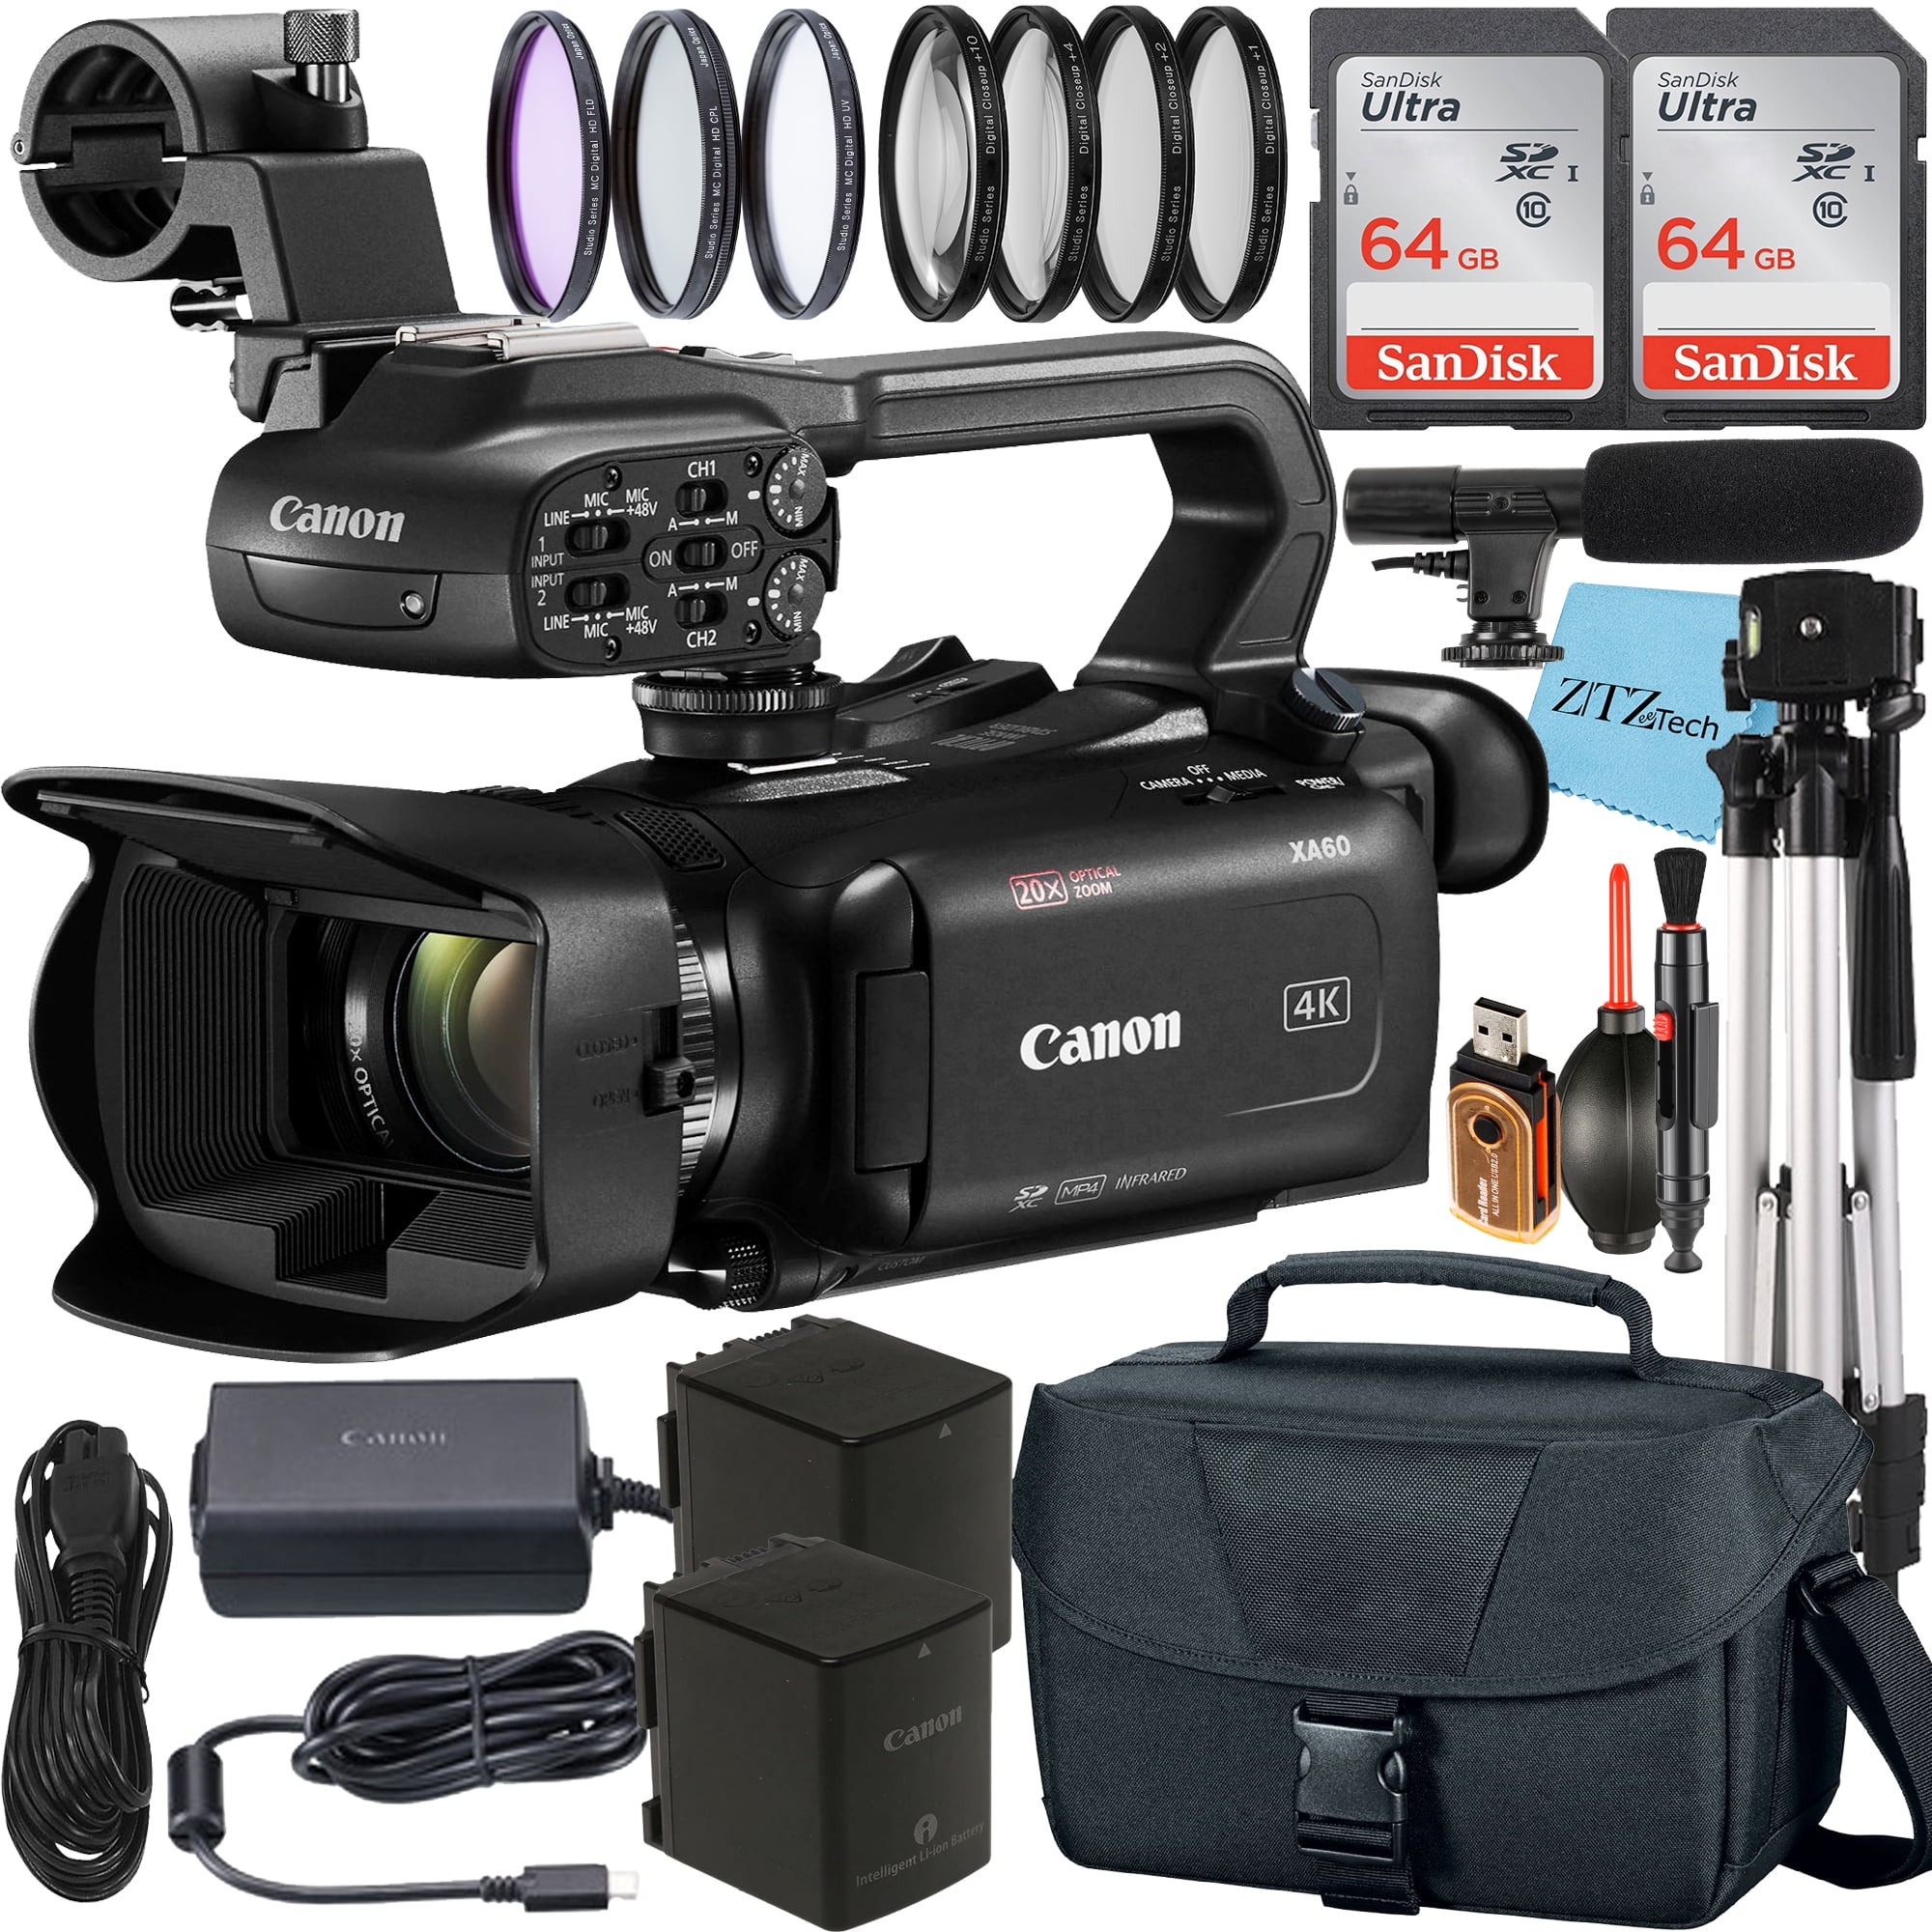 Canon XA60 Professional UHD 4K Camcorder with 2 Pack SanDisk Memory Card + Case + Tripod + Filter Kit + + ZeeTech Accessory Bundle - Walmart.com